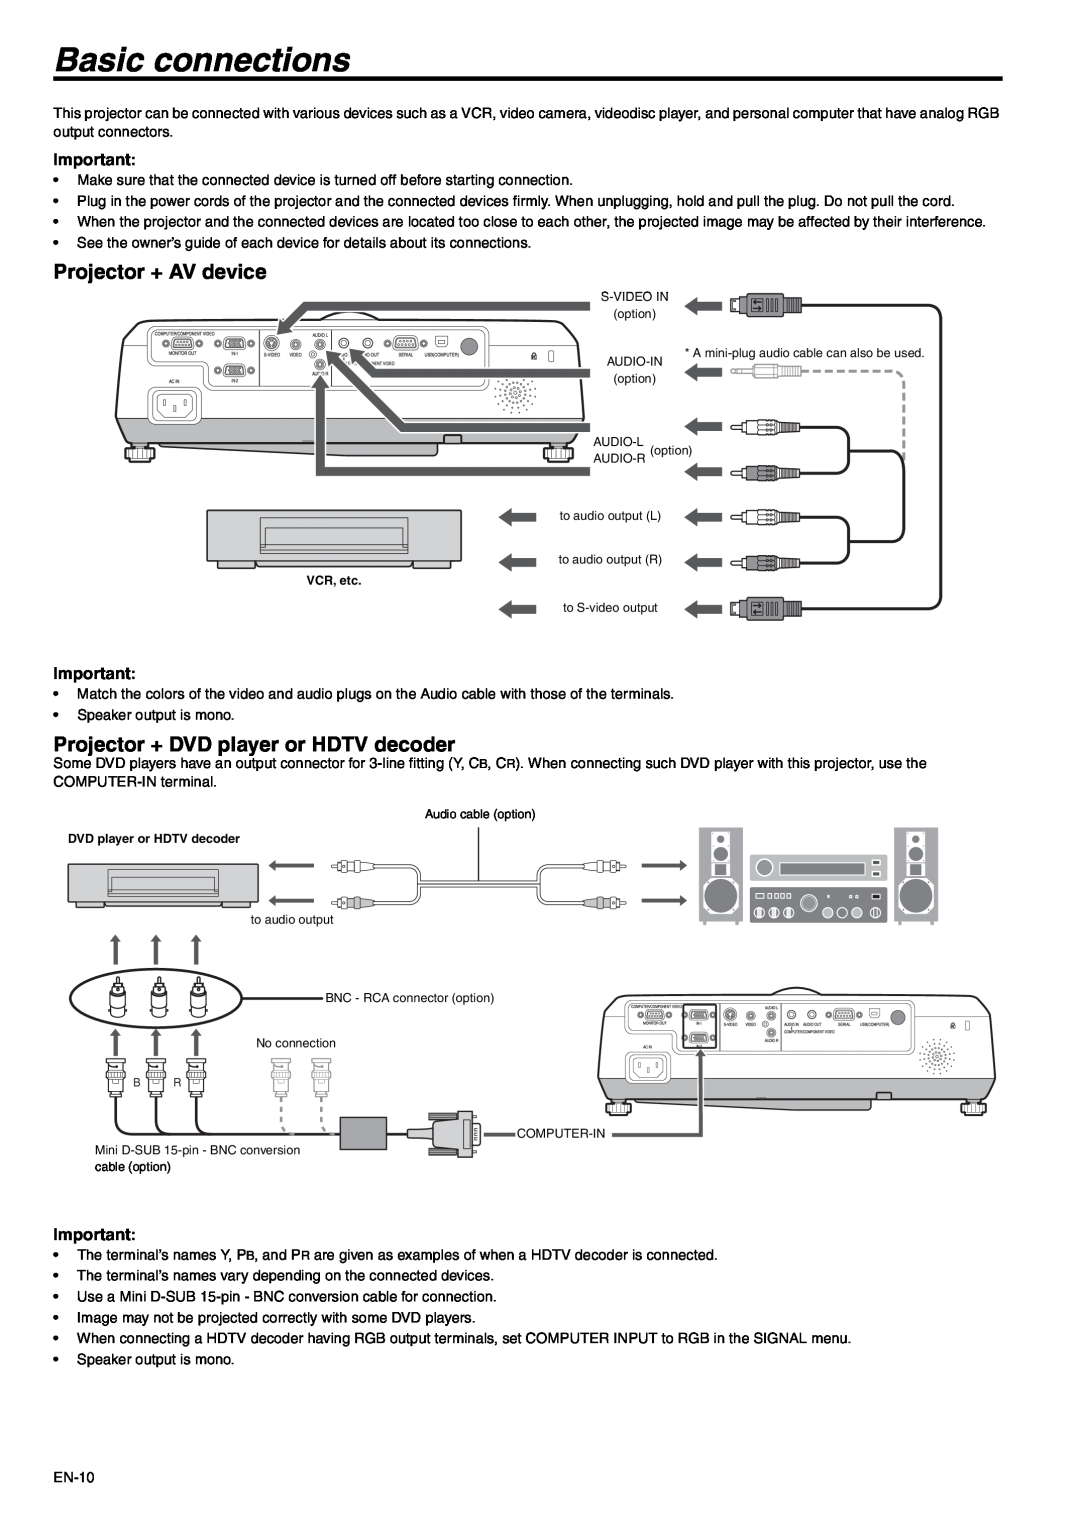 Mitsubishi Electronics XD500U-ST Basic connections, Projector + AV device, Projector + DVD player or HDTV decoder 